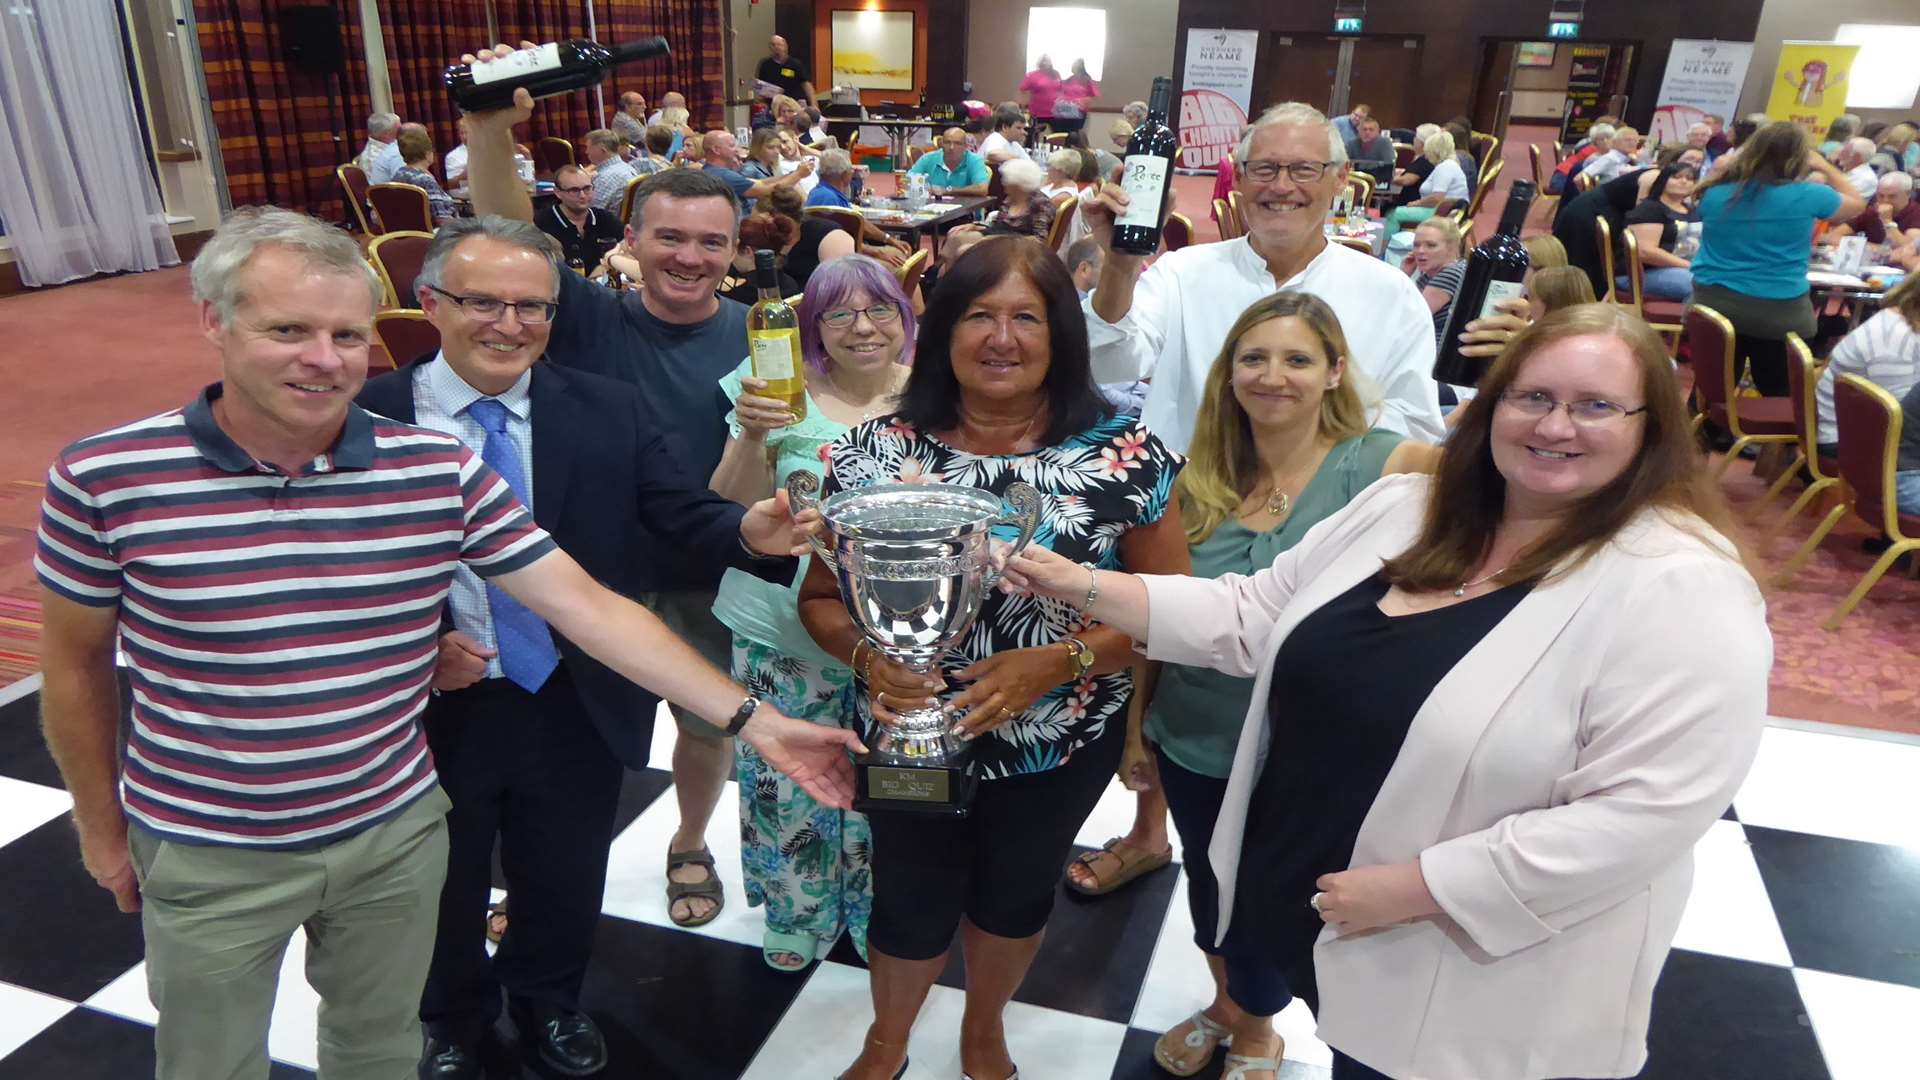 Moomins receive Ashford KM Big Charity Quiz trophy from David Fifield of Hallett and Co, Clive Perry of Specsavers and Rebecca Naylor of Ashford International Hotel.